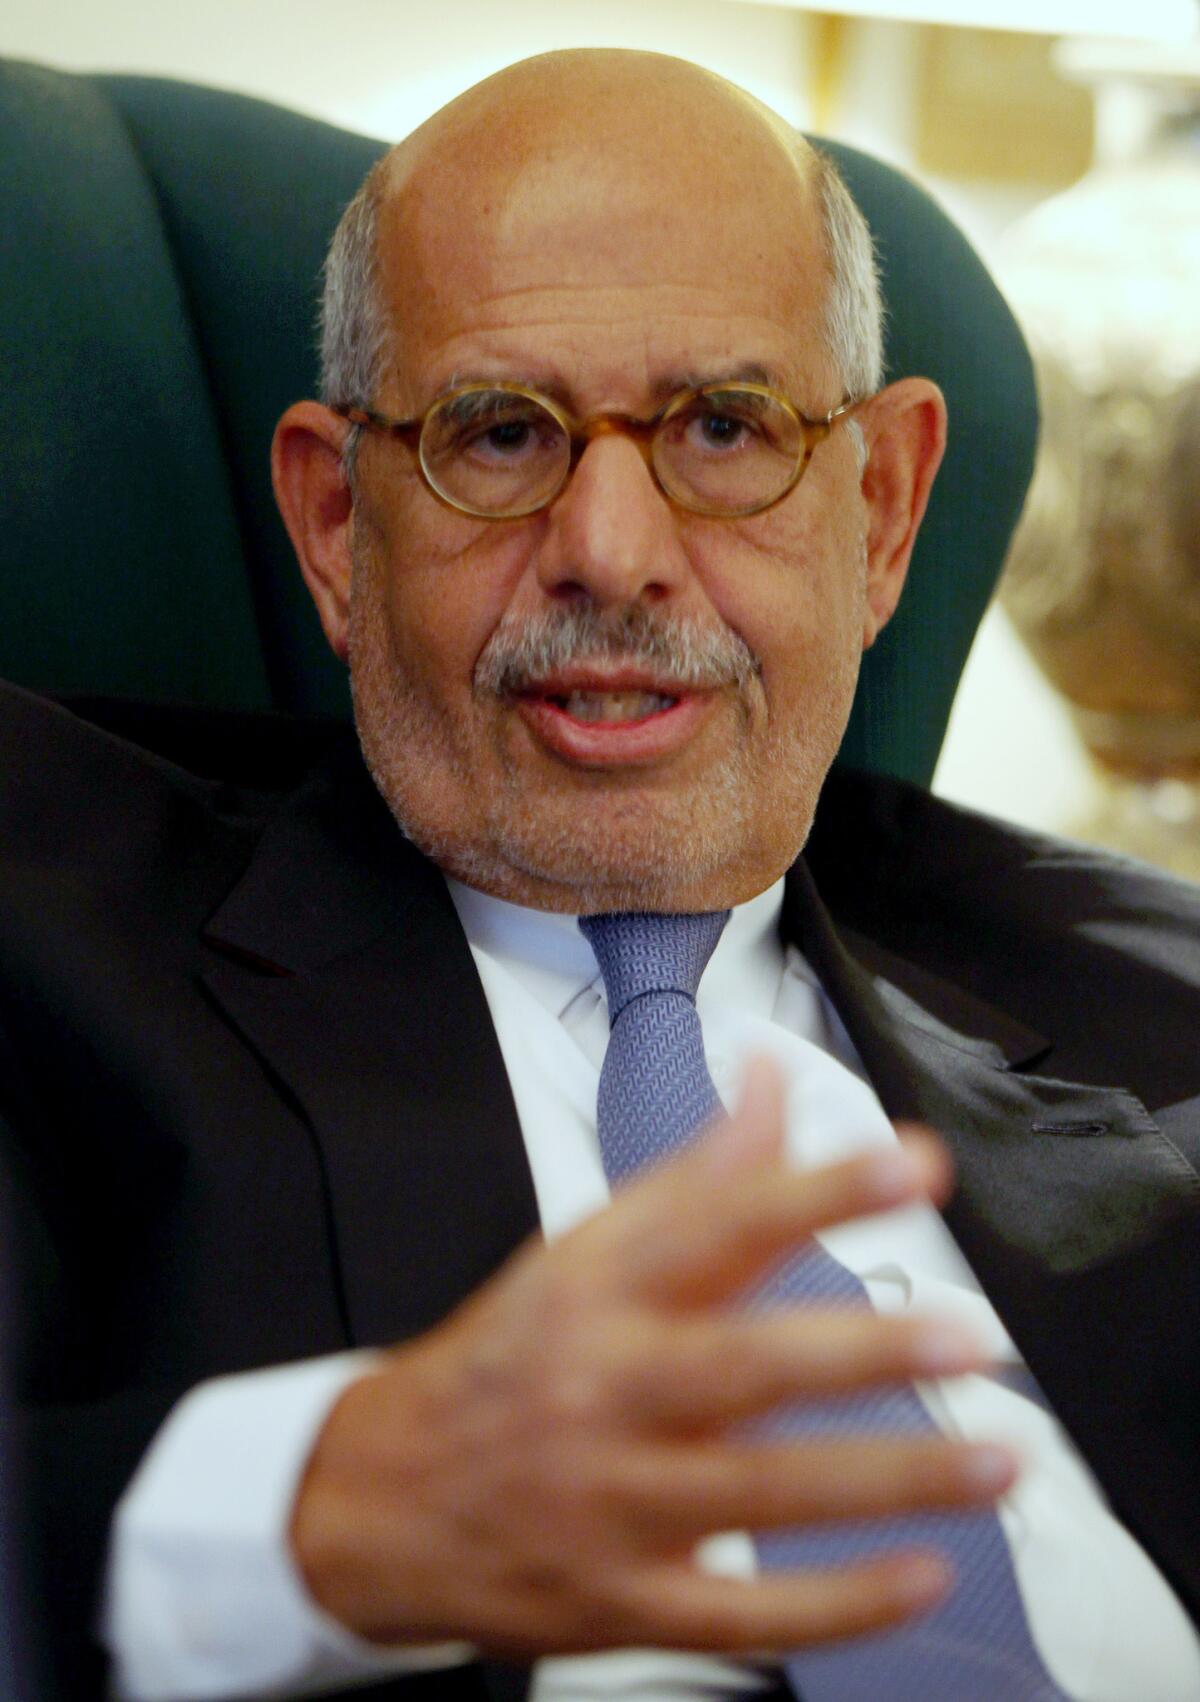 Mohamed ElBaradei speaks to a small group of journalists on April 30 at his house on the outskirts of Cairo. His office says the pro-reform leader has been named interim prime minister of Egypt.